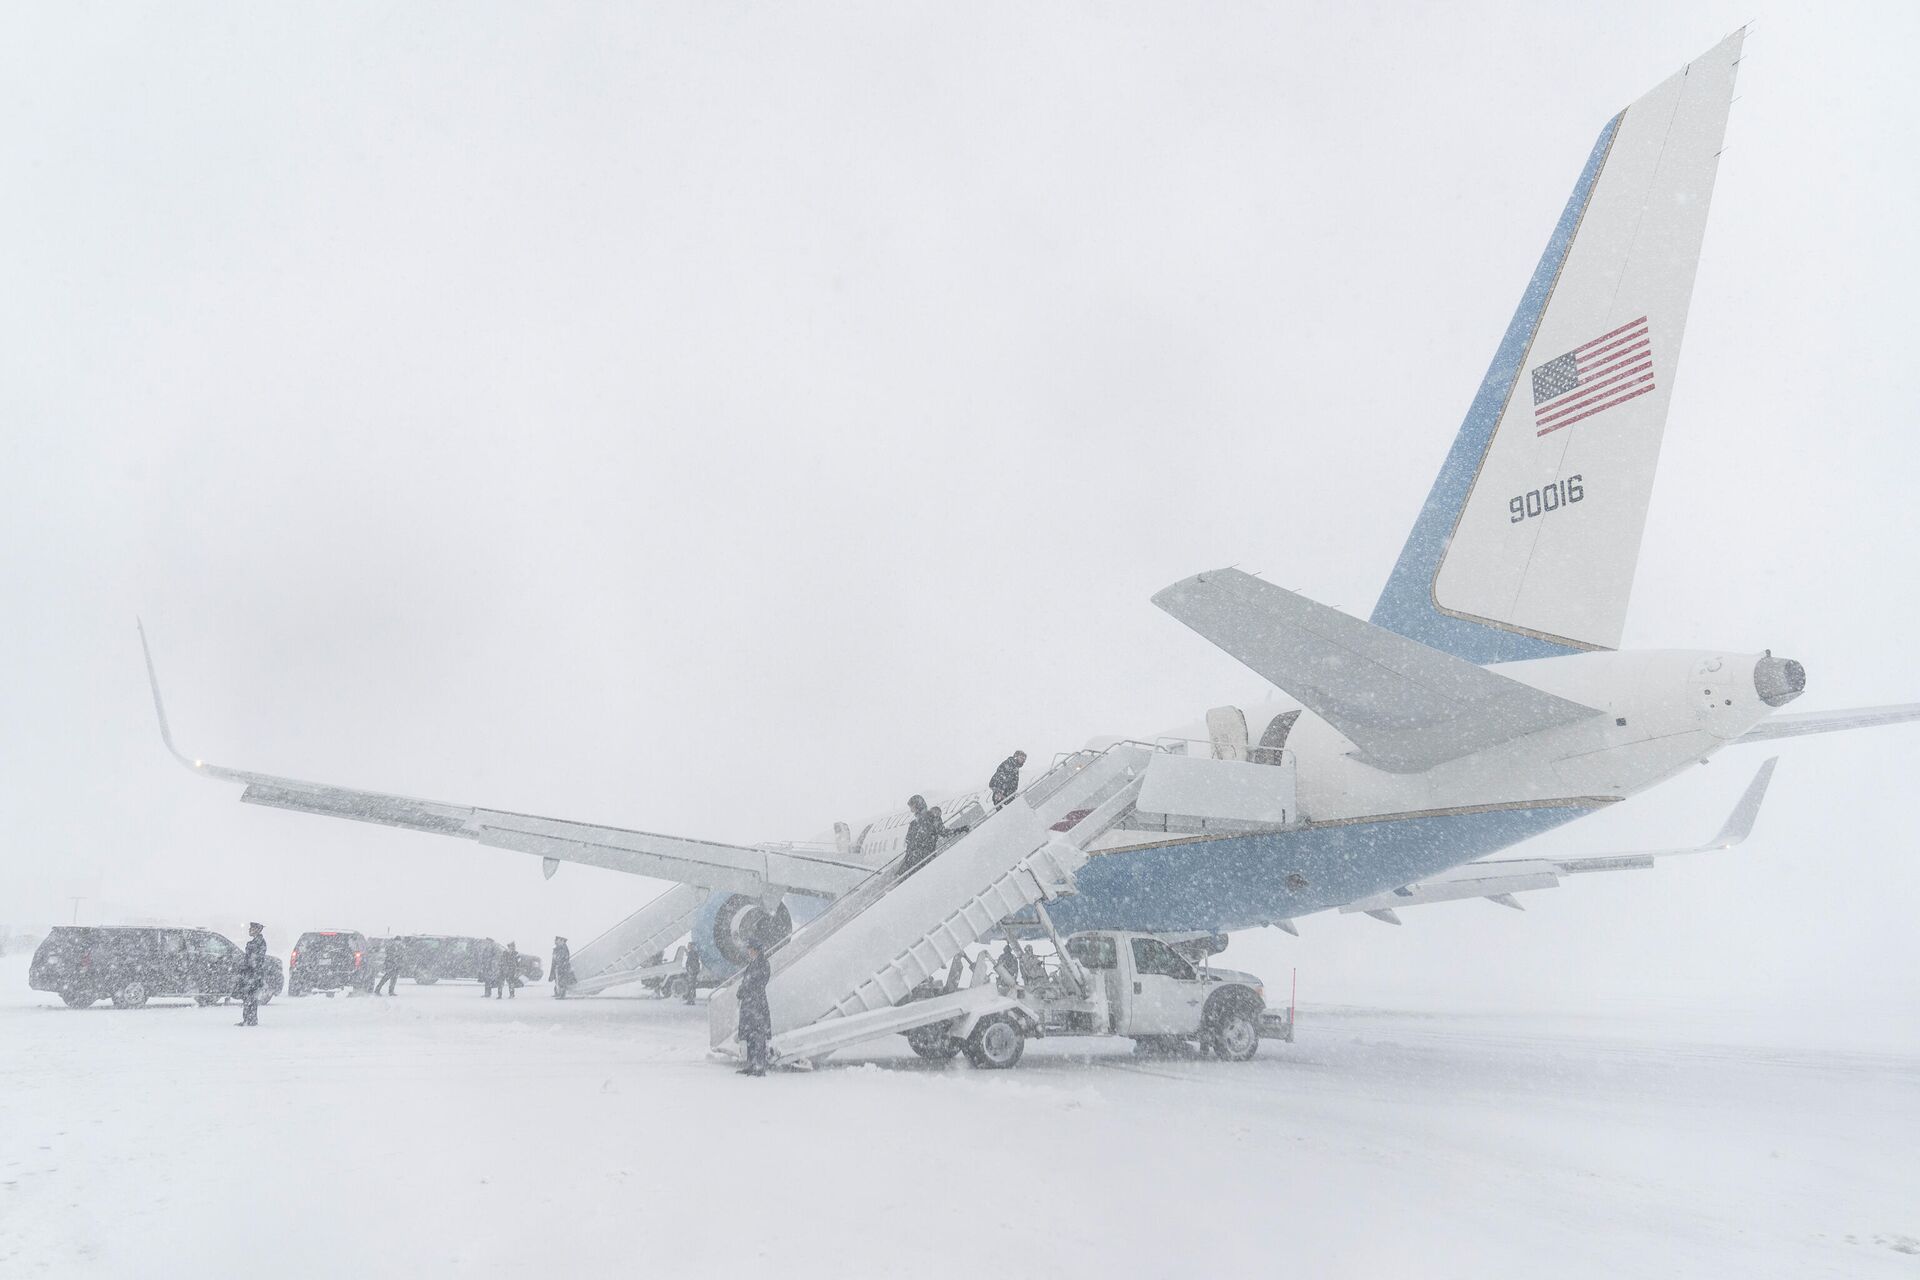 President Joe Biden's motorcade sits on the tarmac next to Air Force One during winter snowstorm at Andrews Air Force Base, Md., Monday, Jan. 3, 2022, just before the president departs for the drive to Washington. - Sputnik International, 1920, 04.01.2022